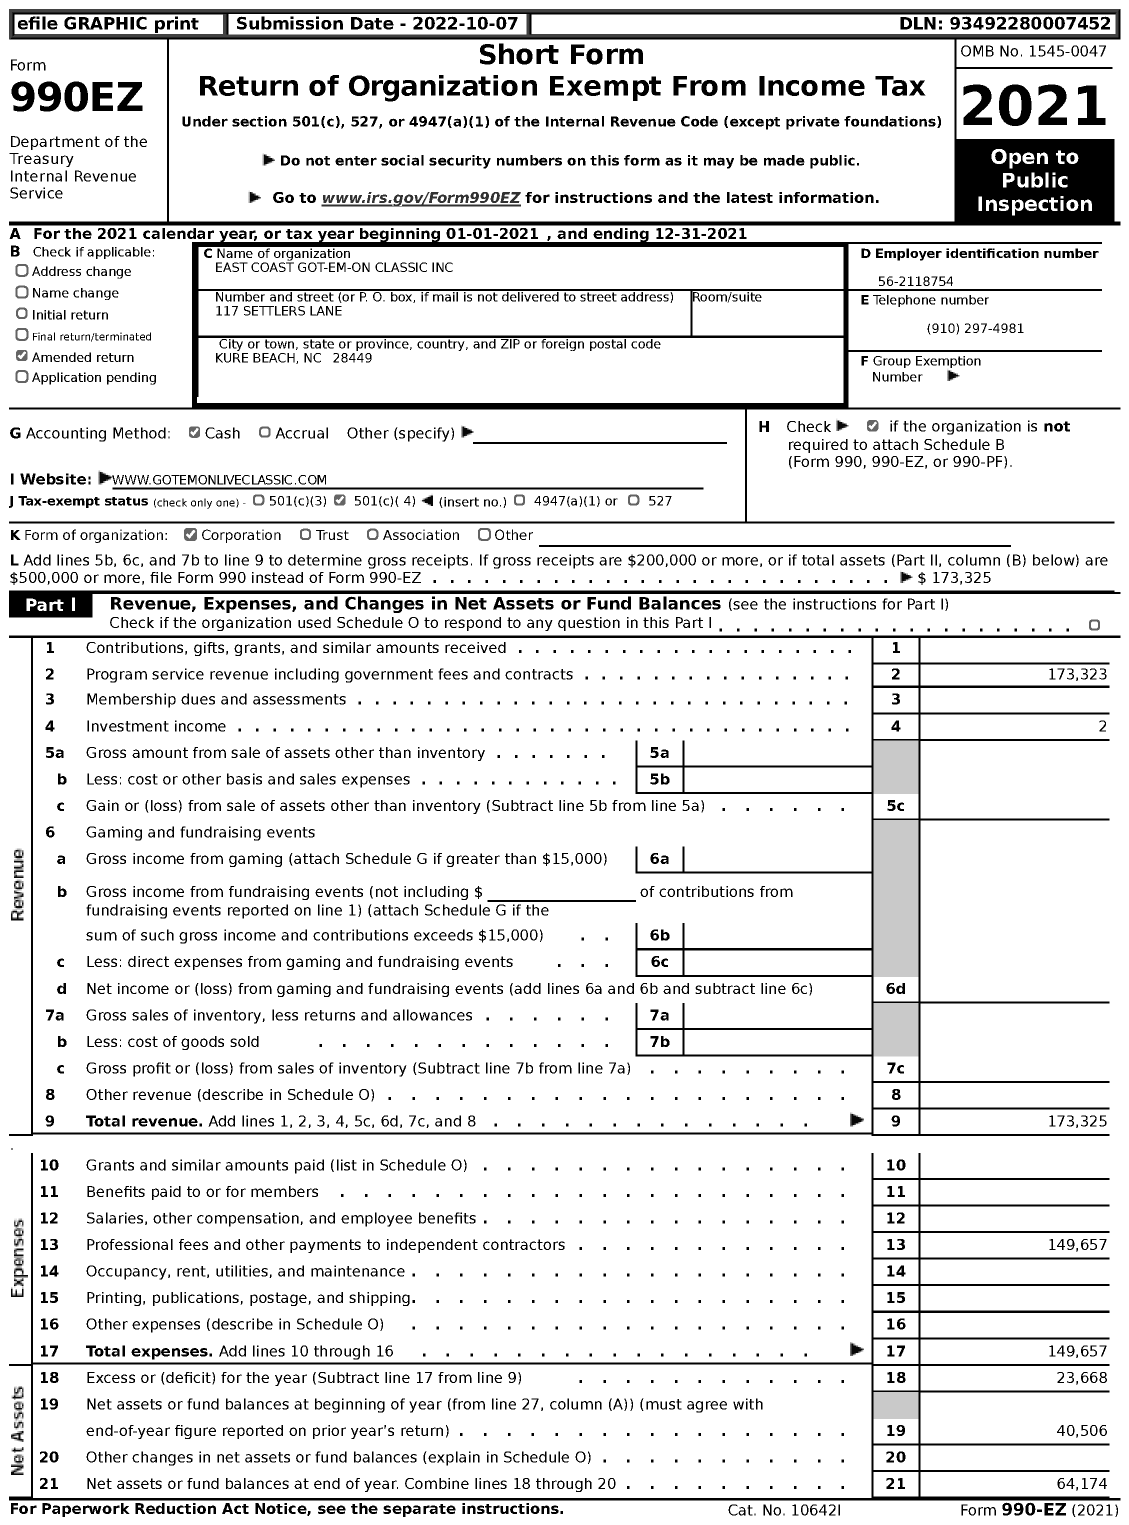 Image of first page of 2021 Form 990EZ for East Coast Got-Em-On Classic